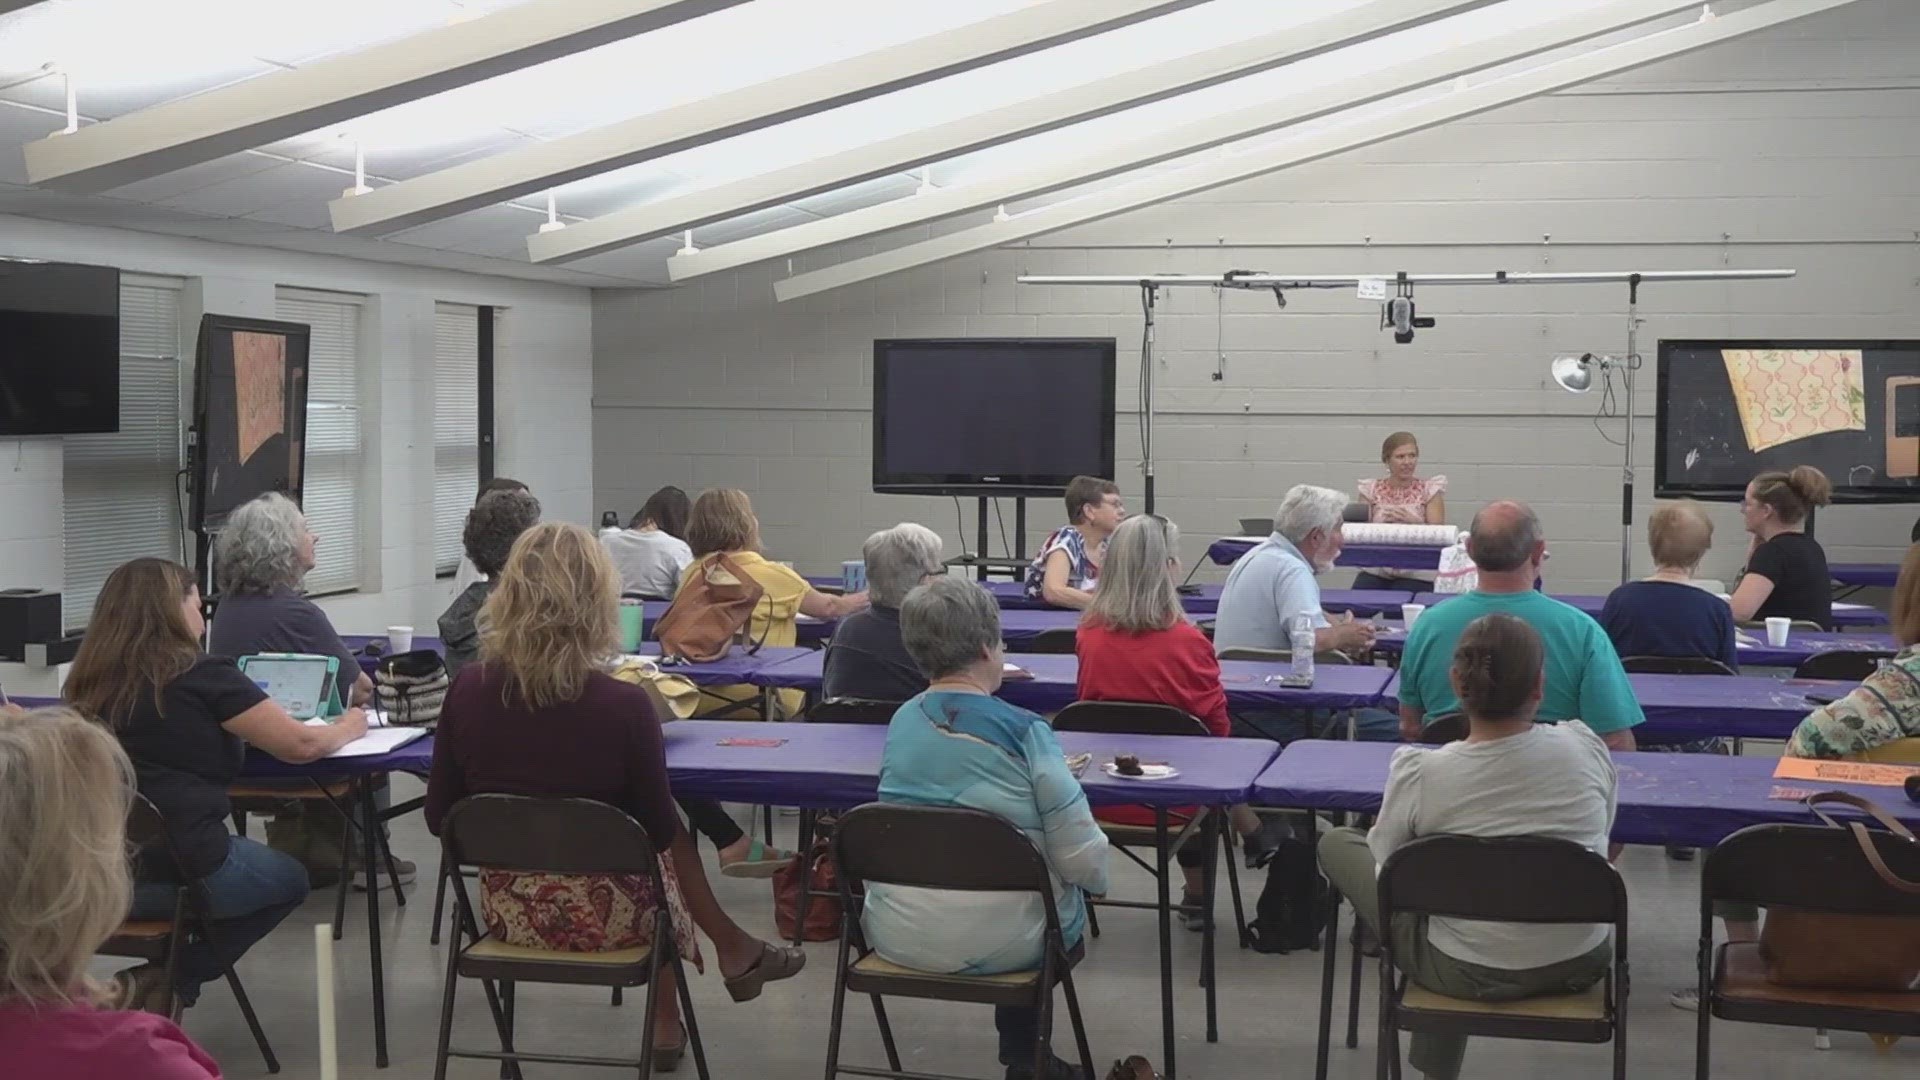 Free demonstrations at the Pallete Club of Midland revealed how one can take a painting and use it for clothing designs or book cover patterns.